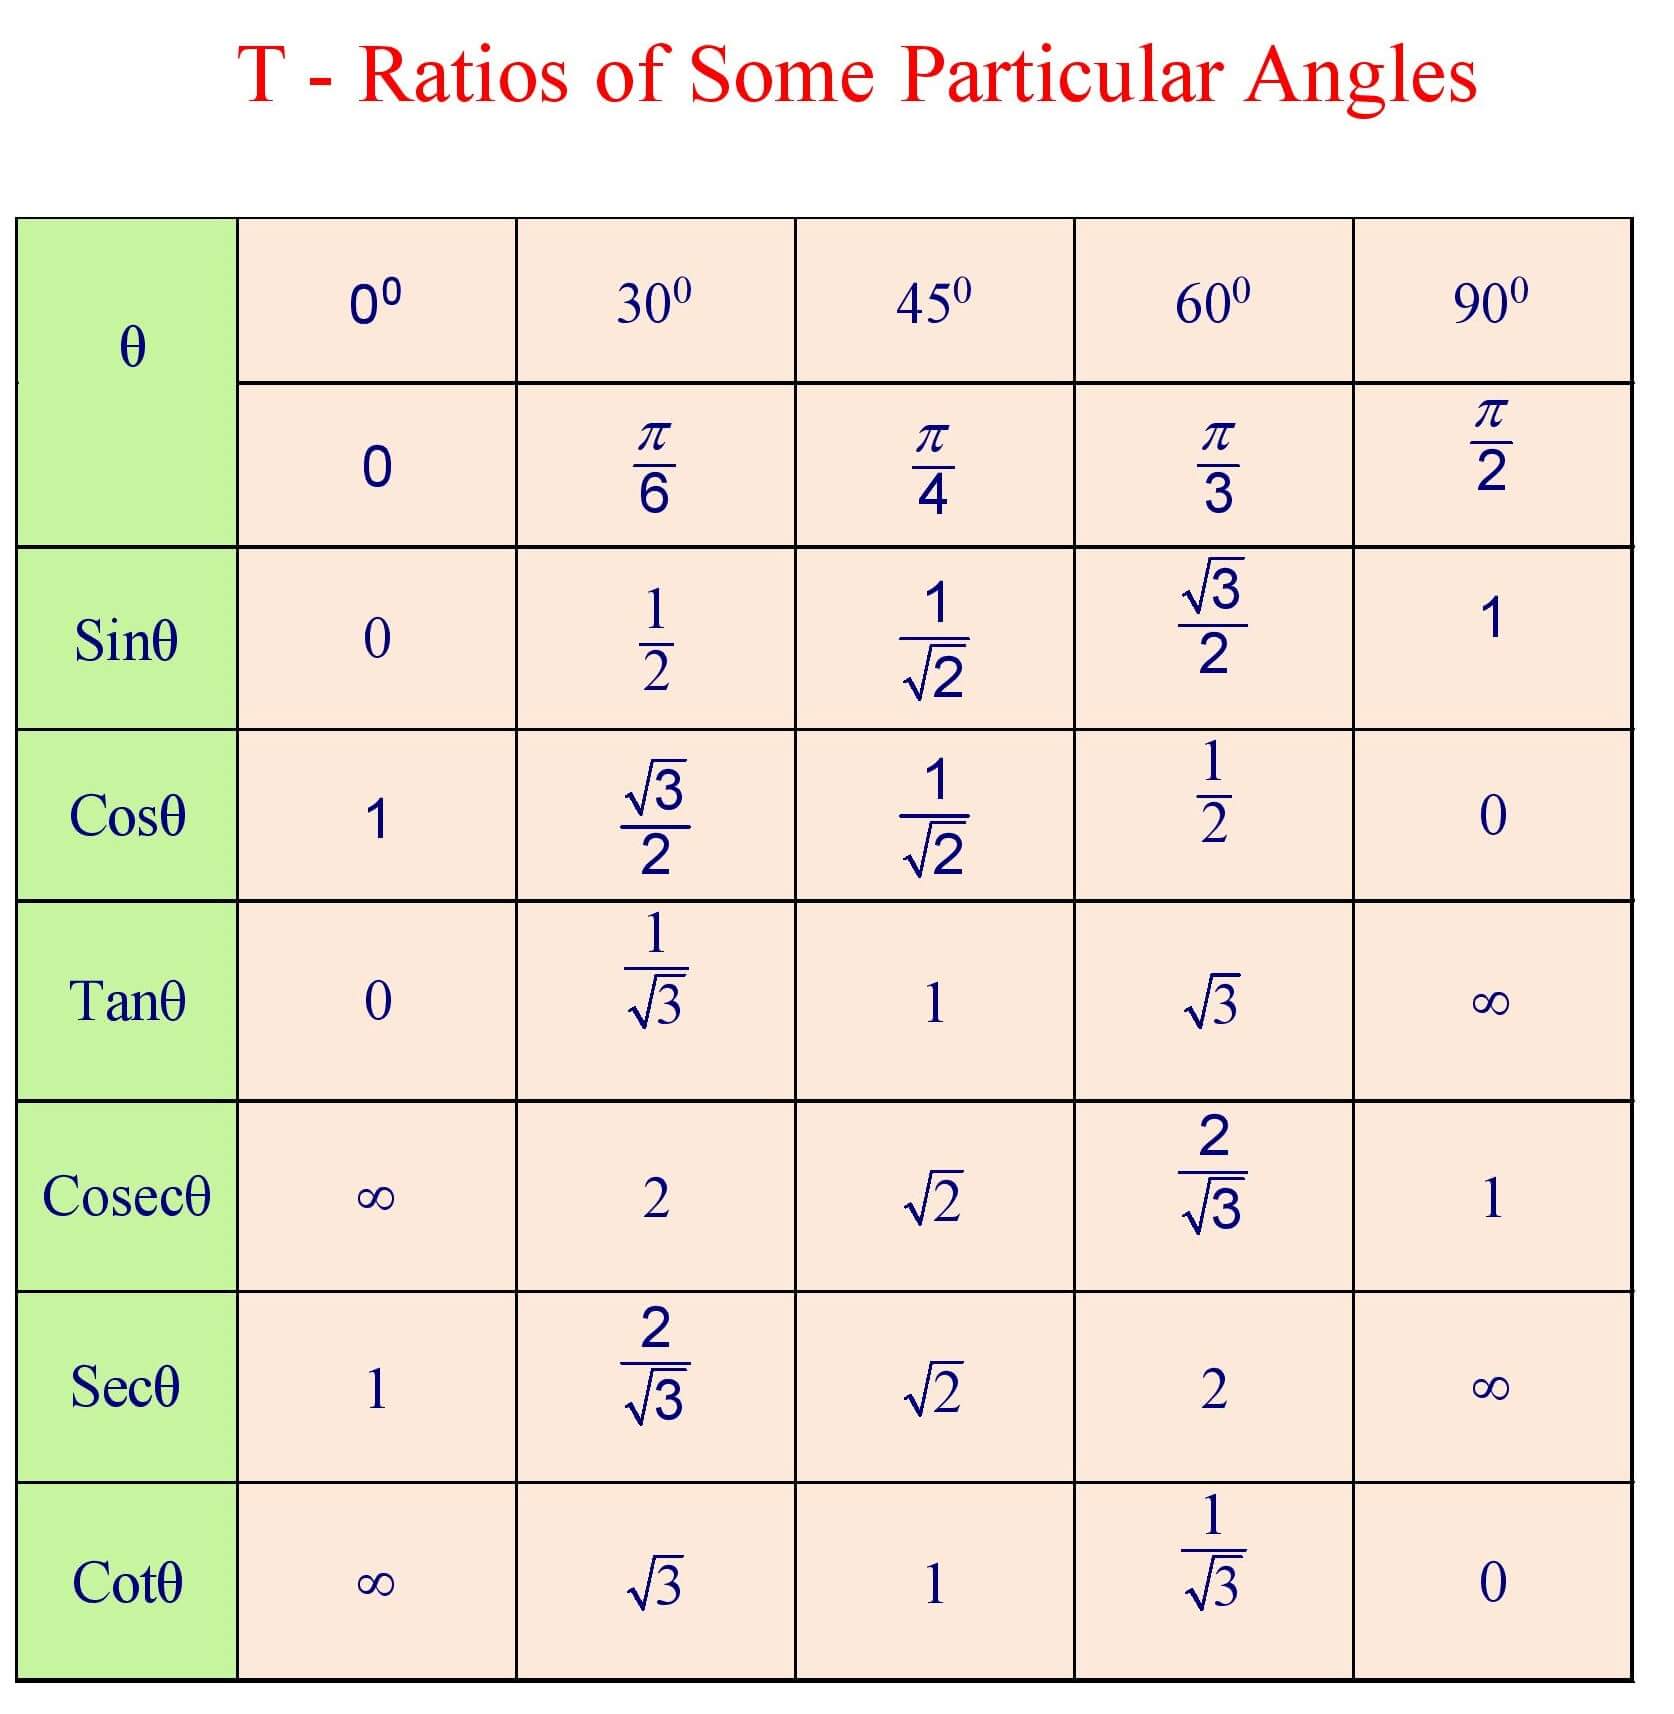 T - Ratios of Some Particular Angles